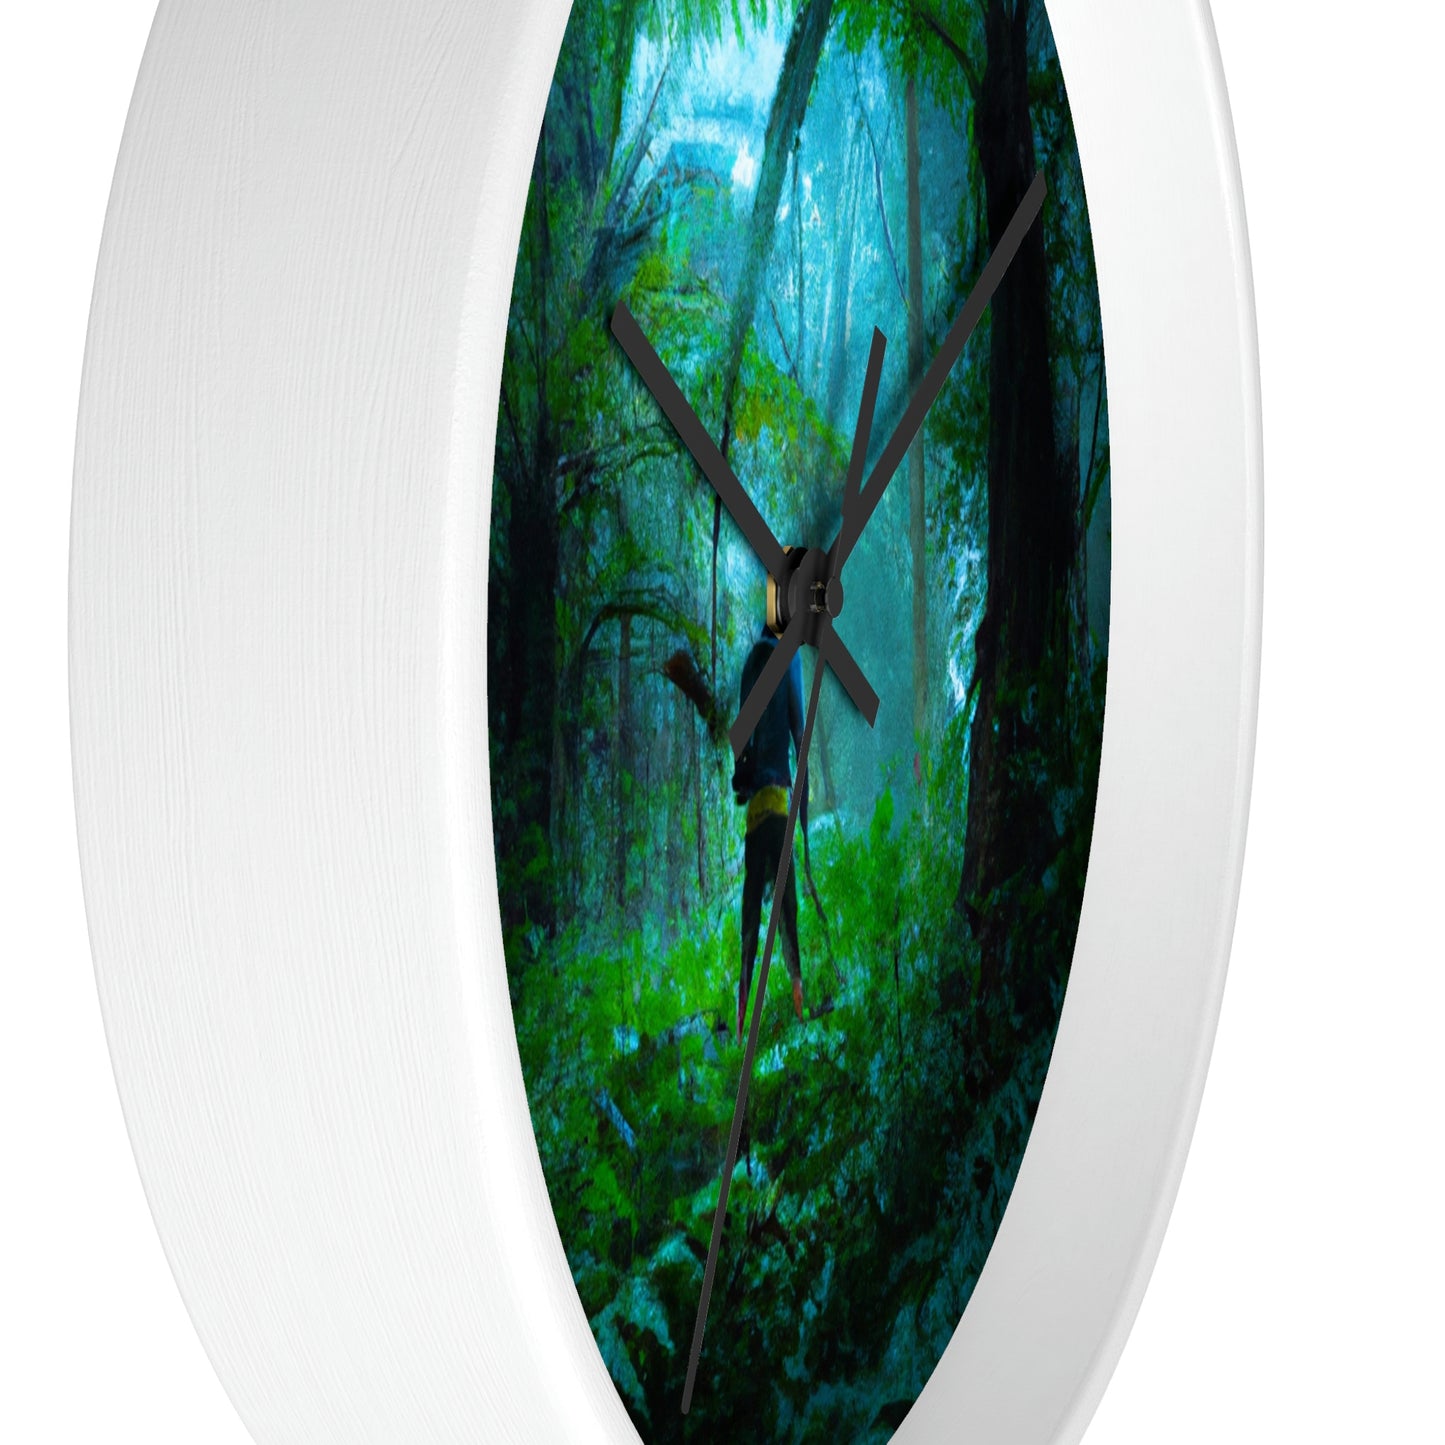 "Lost in the Unknown". - The Alien Wall Clock